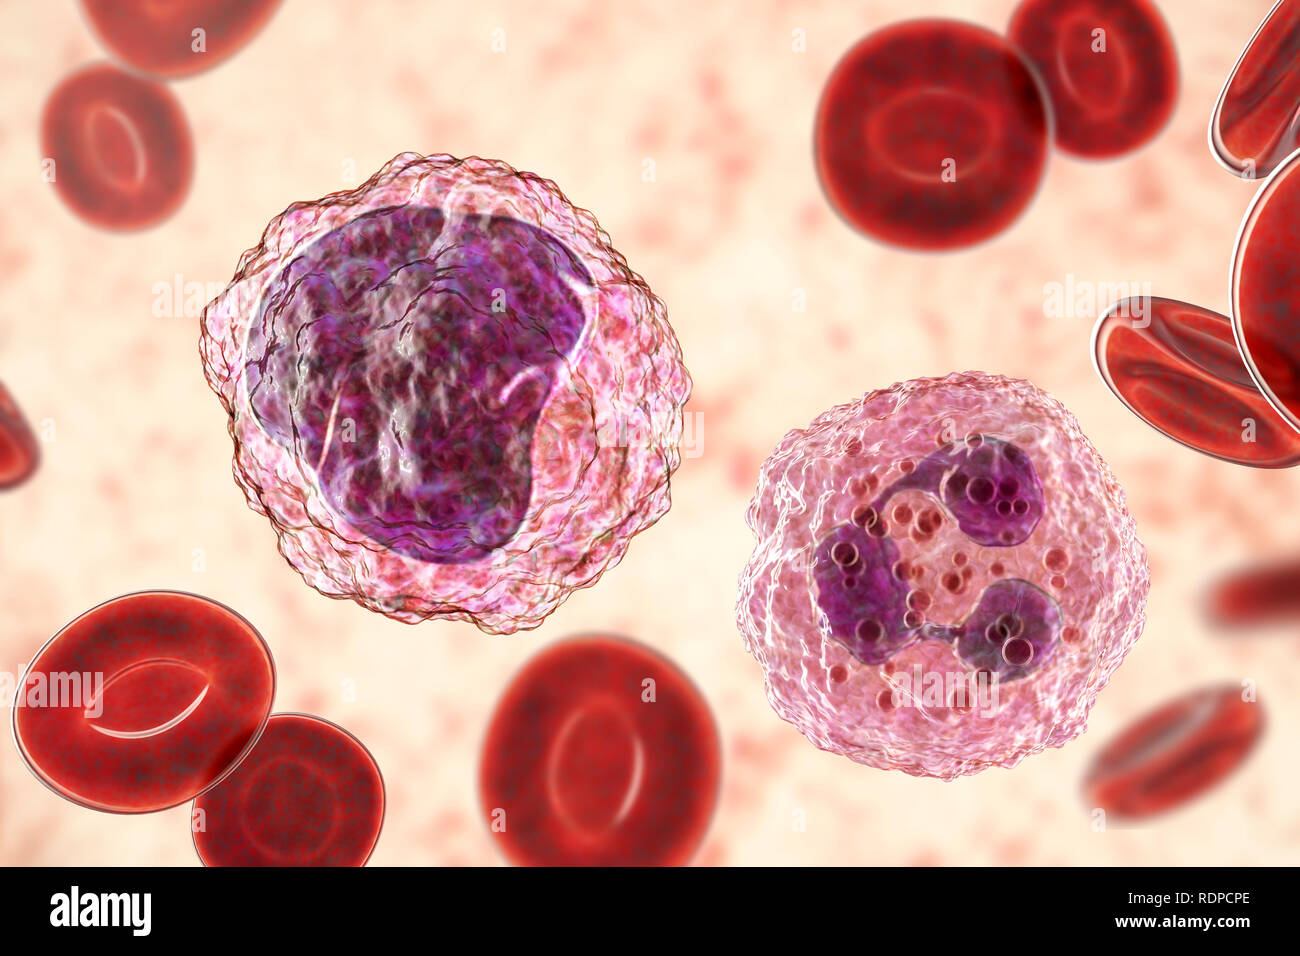 Neutrophil (right) and monocyte (left) white blood cell in blood smear, computer illustration. Neutrophils are the most abundant white blood cell and are part of the body's immune system. Monocytes are the largest white blood cells; they engulf and digest invading bacteria and cell debris. Stock Photo